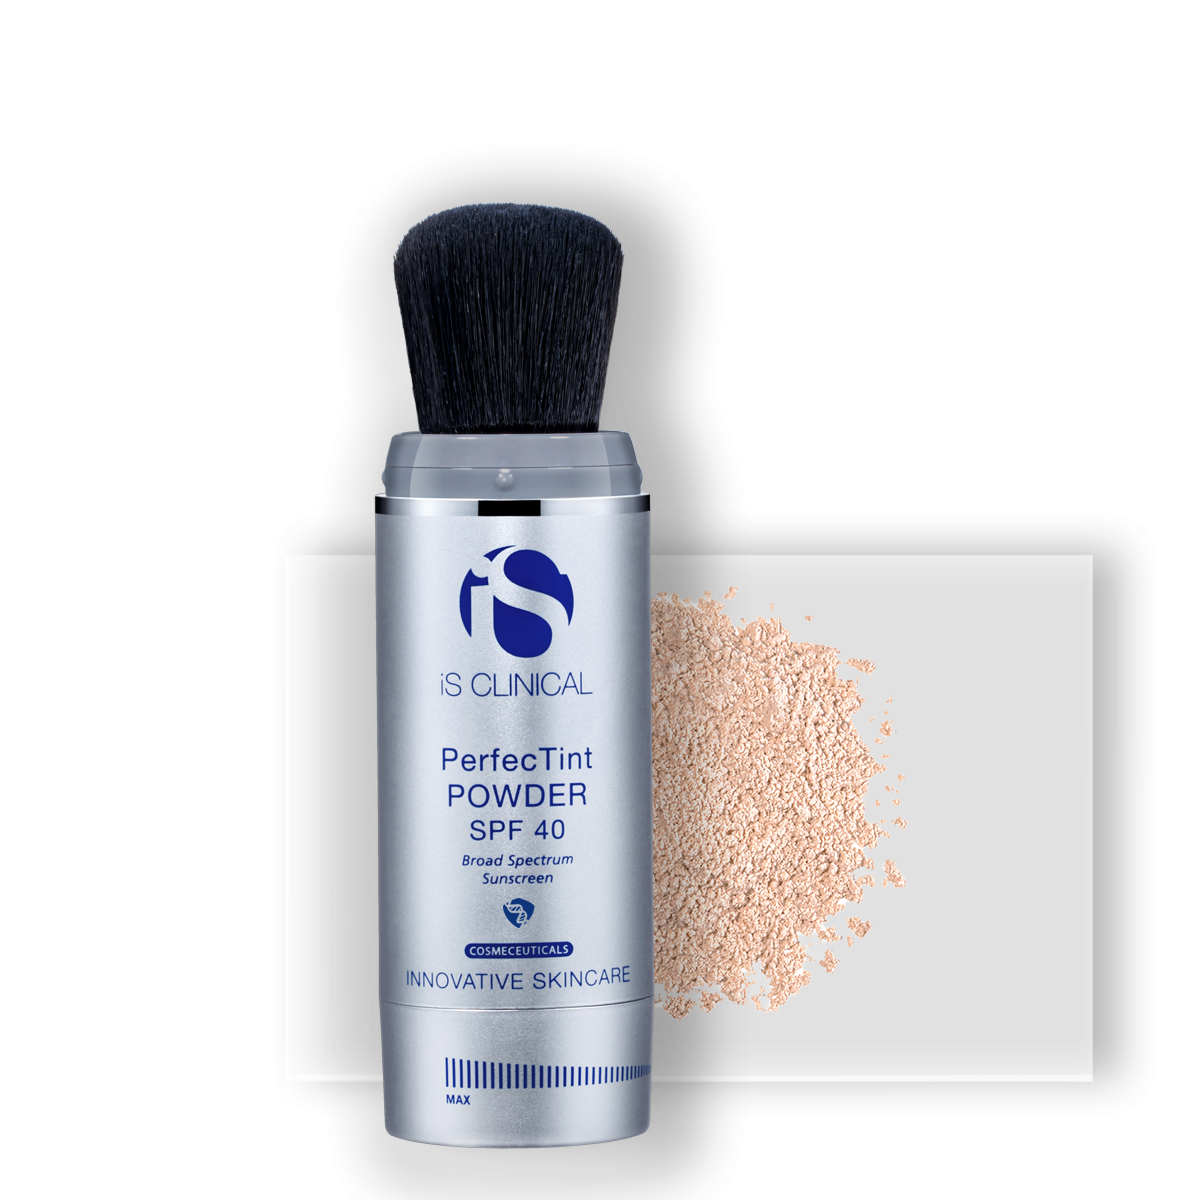 iS Clinical PerfecTint Powder SPF 40 - a cosmetic powder that provides silky smooth broad spectrum coverage to help protect skin against the visible signs of photoaging while minimizing the appearance of pores and absorbing surface oil to create a flawless finish. Shown in ivory.